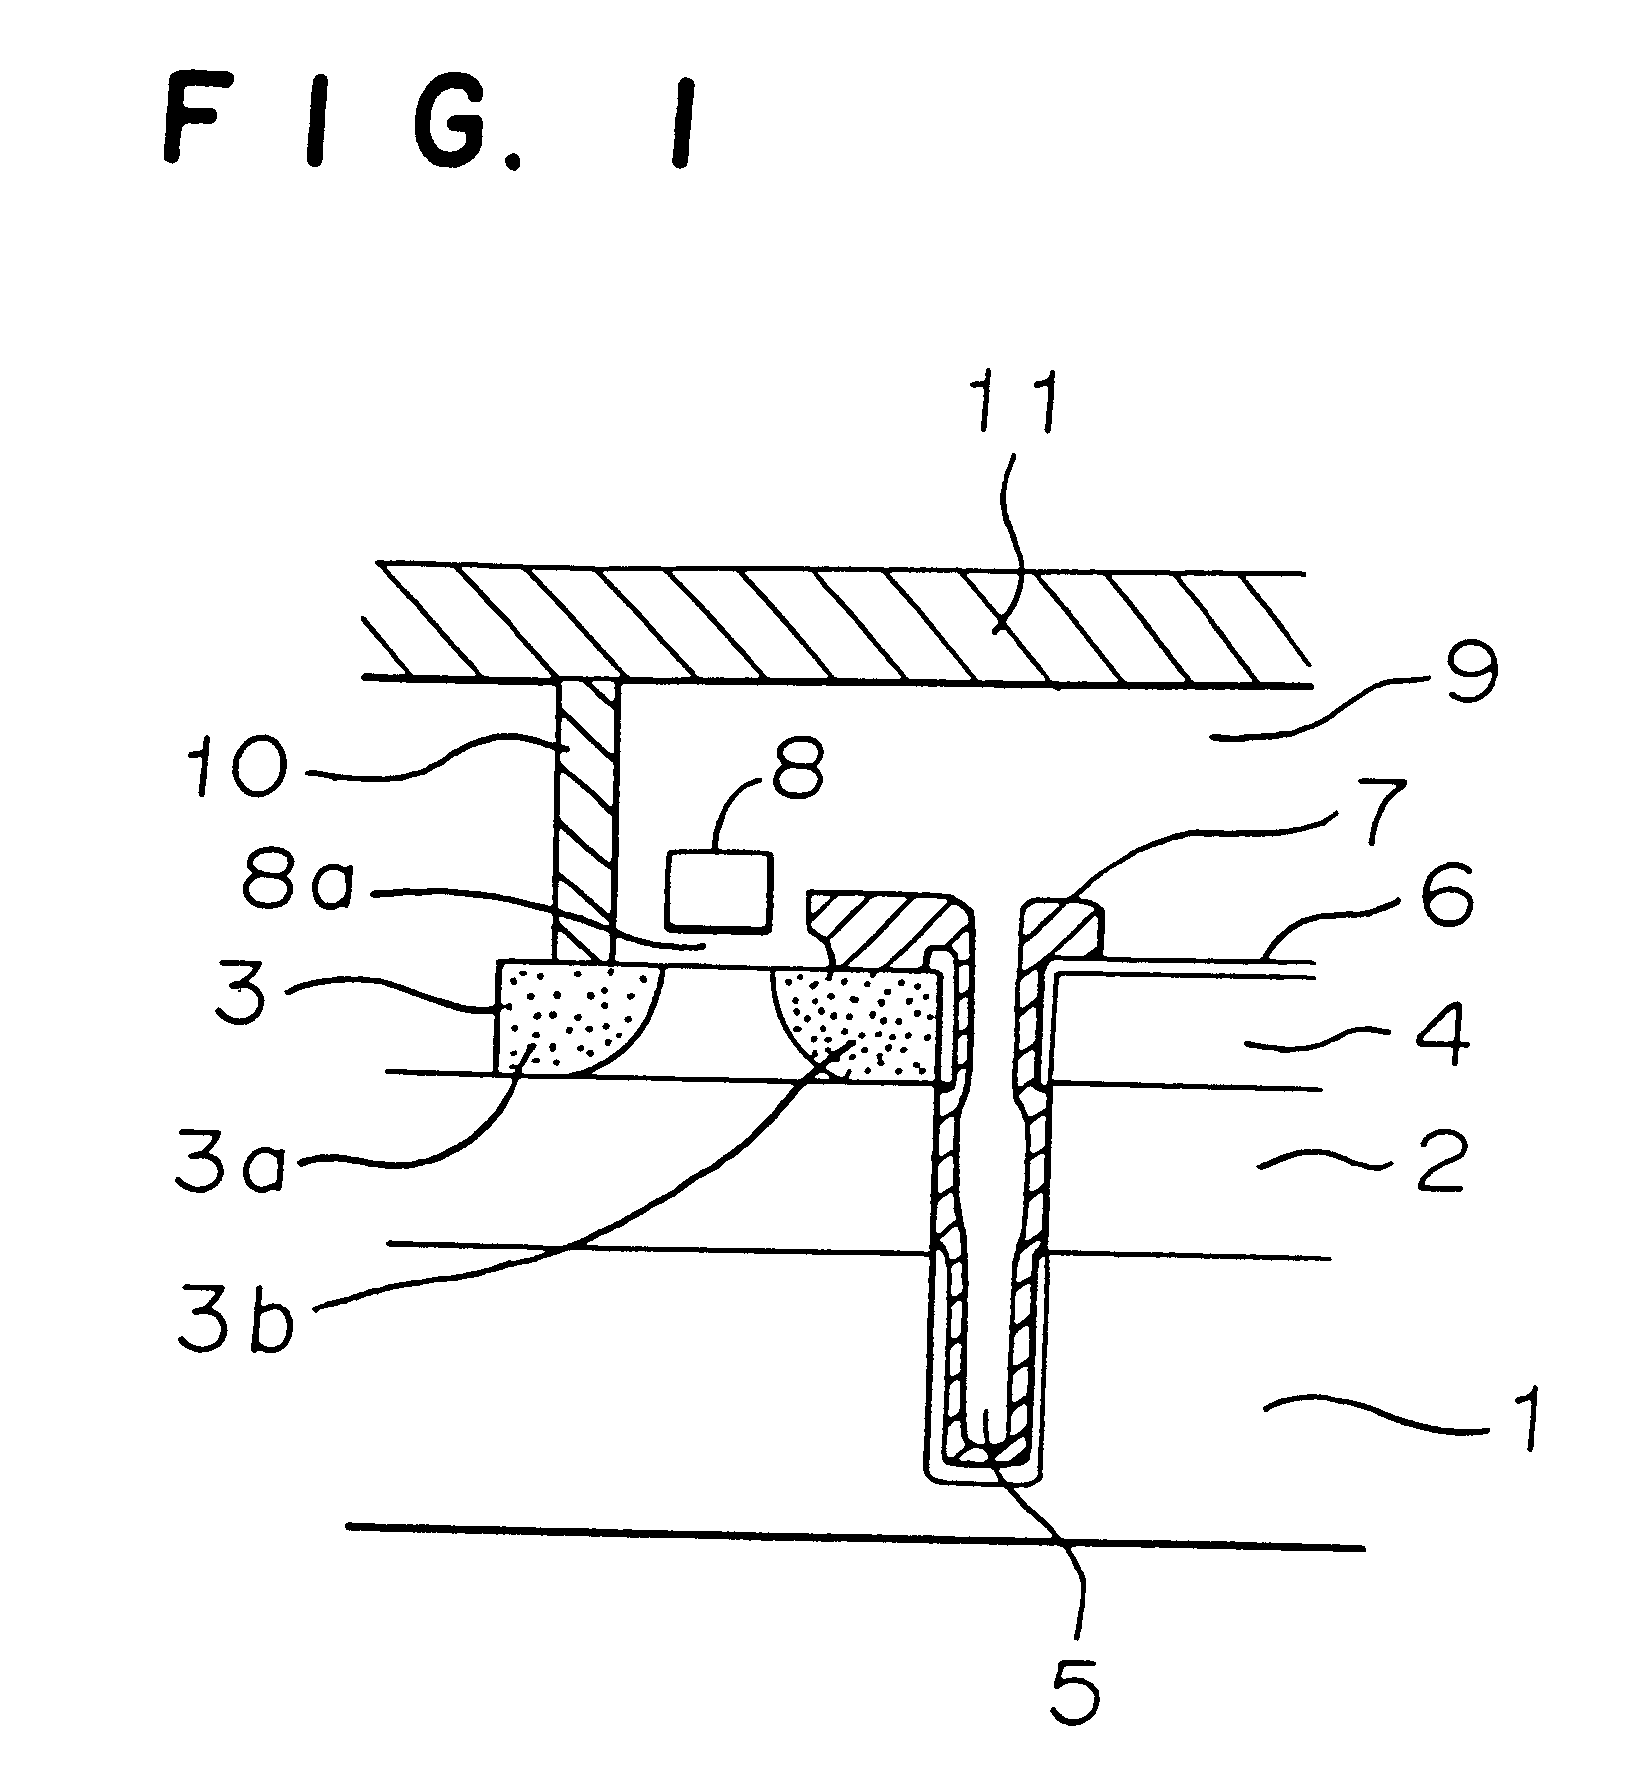 Method of manufacturing a semiconductor memory device